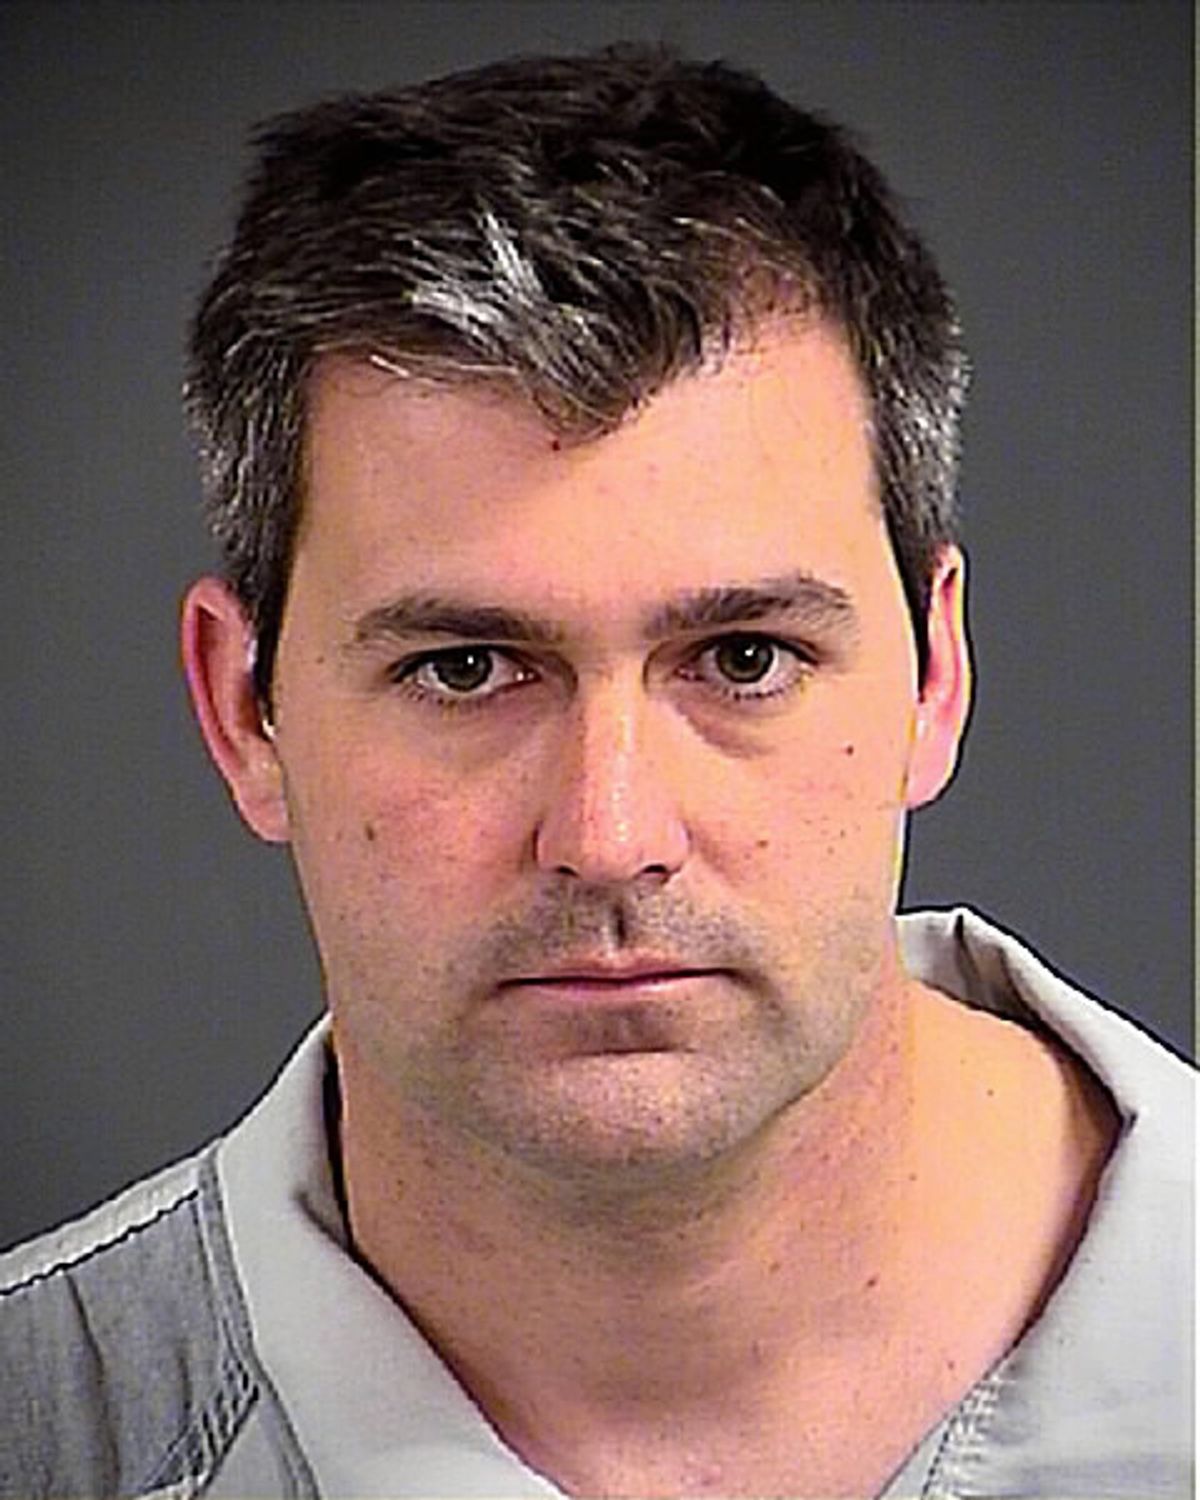 FILE - This April 7, 2015, file photo provided by the Charleston County, S.C., Sheriff's Office shows Patrolman Michael Thomas Slager. A grand jury in Charleston on Monday, June 8, 2015,  affirmed the state of South Carolina's murder charge against Slager, who is accused of shooting an unarmed black man trying to run from a traffic stop. (AP Photo/Charleston County Sheriff's Office, File) (AP)